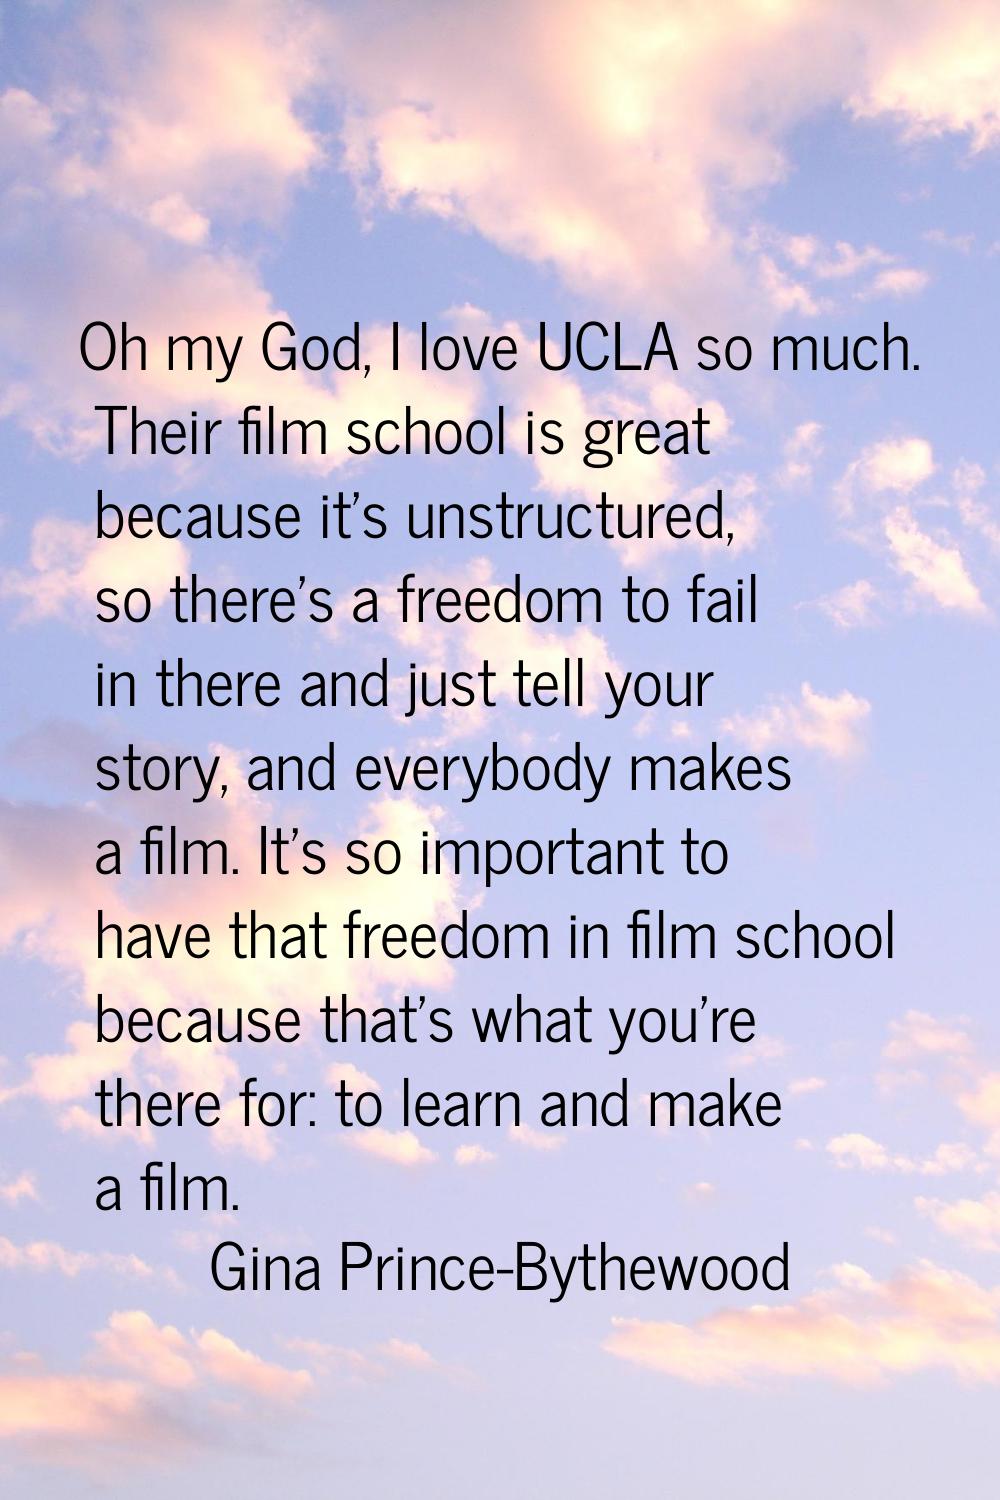 Oh my God, I love UCLA so much. Their film school is great because it's unstructured, so there's a 